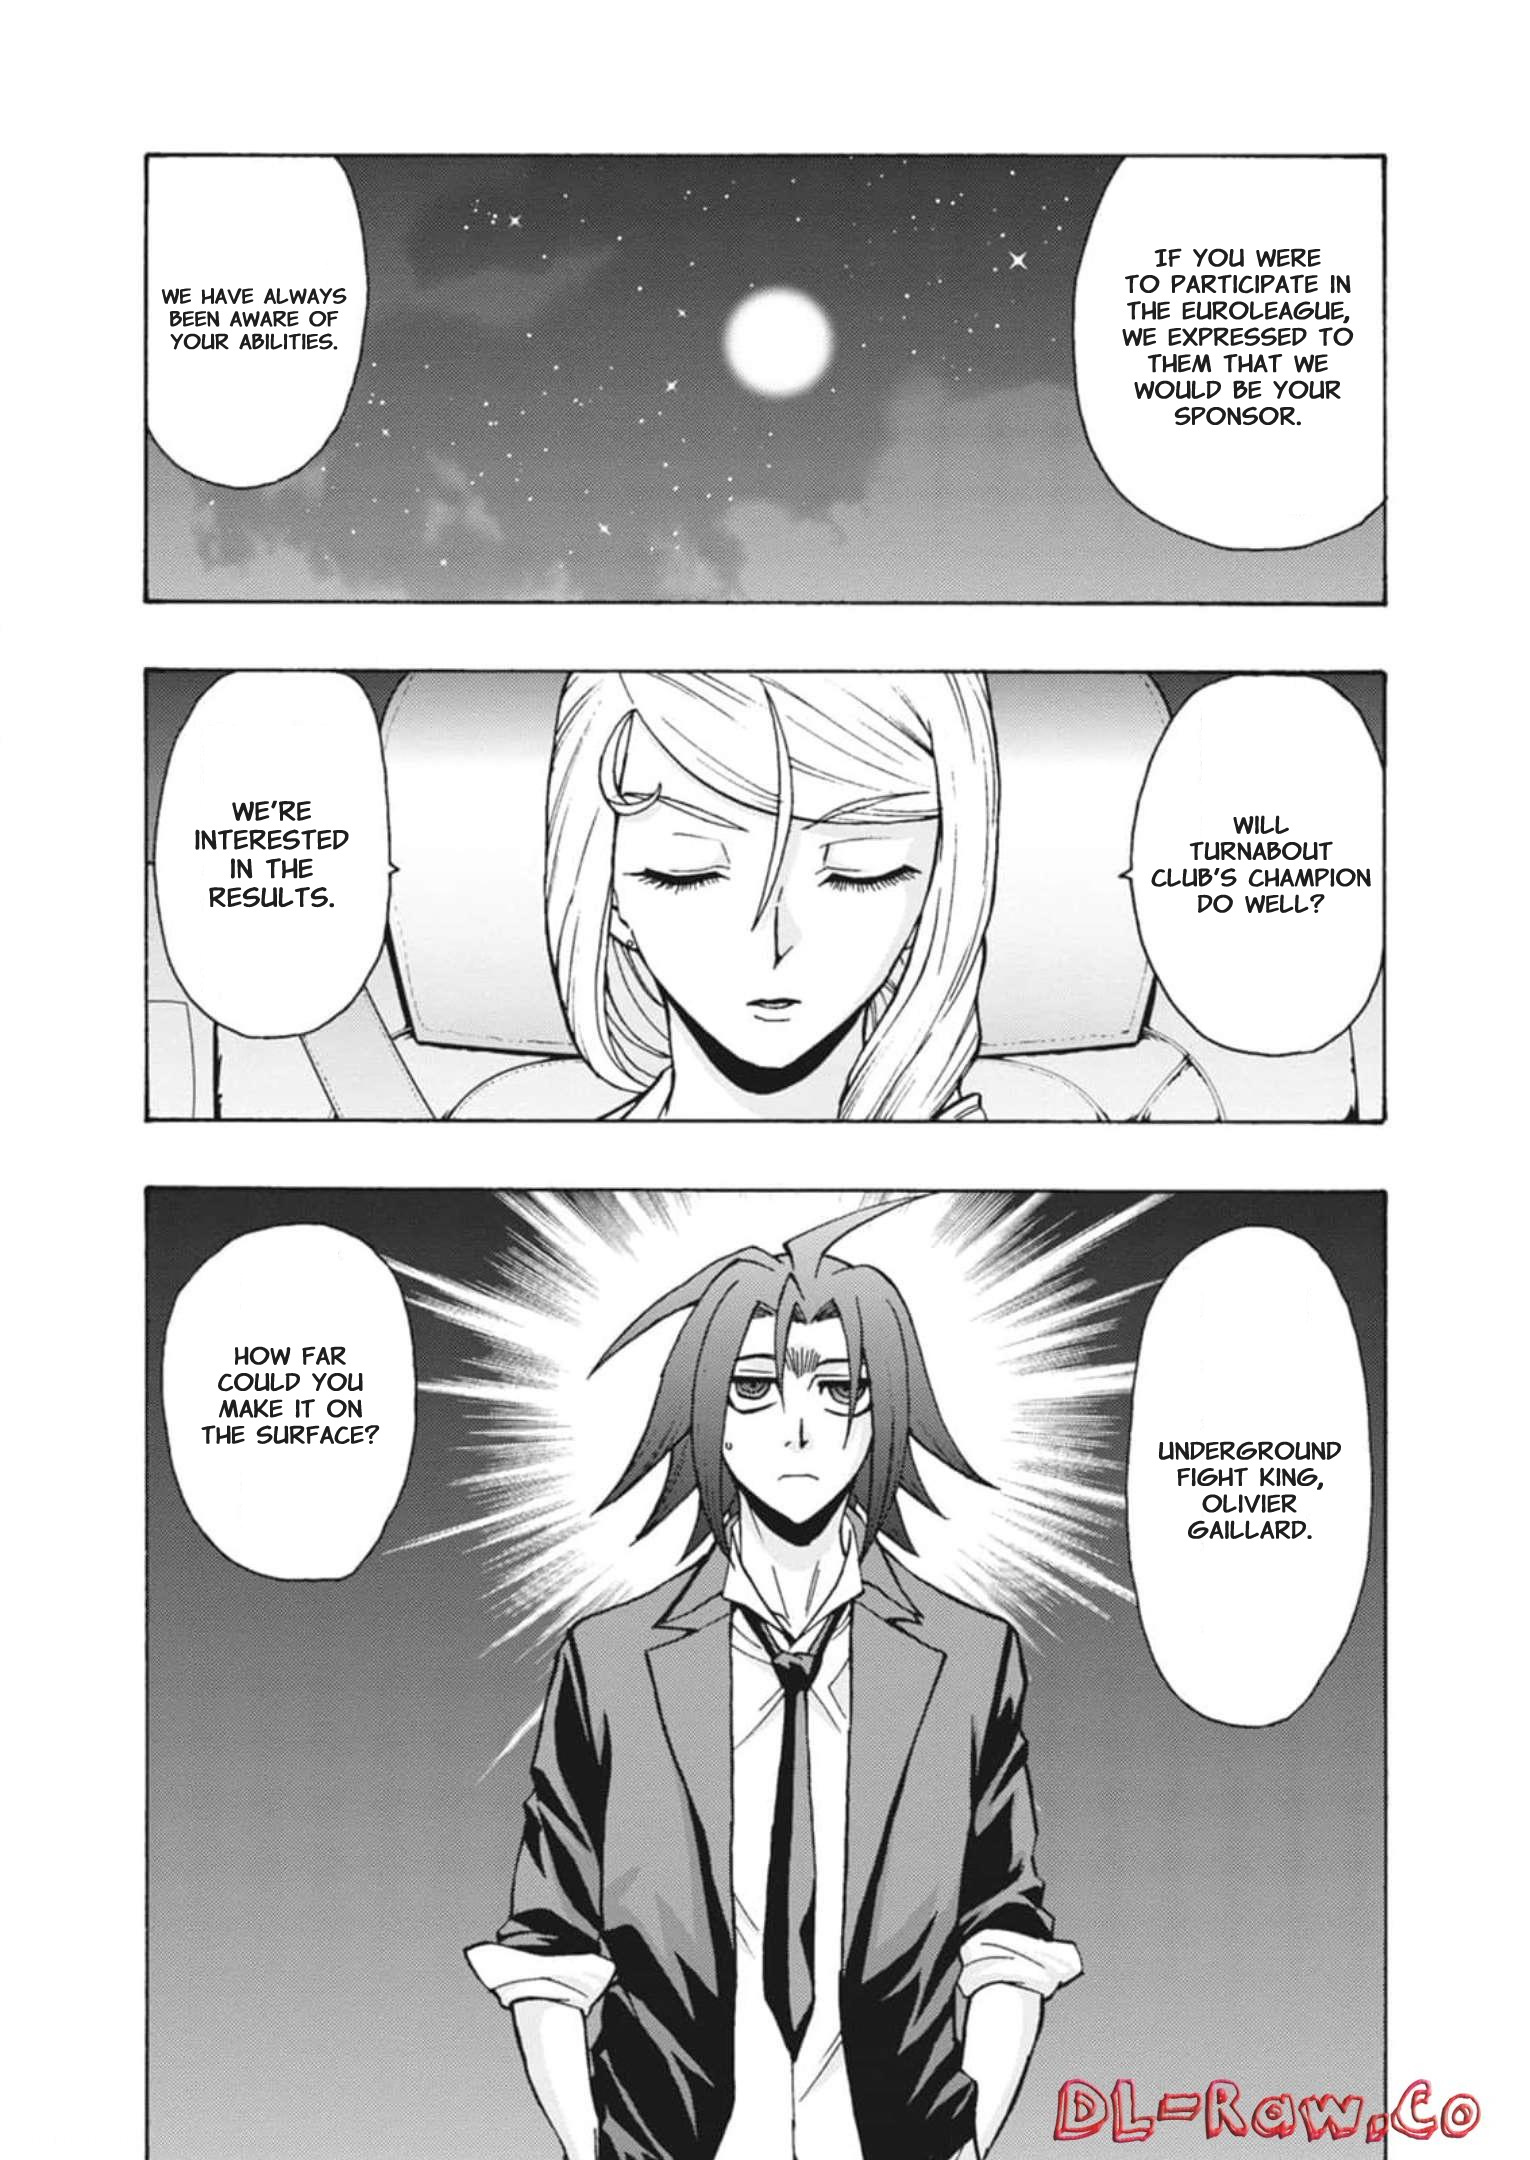 Cardfight!! Vanguard: Turnabout - Page 4